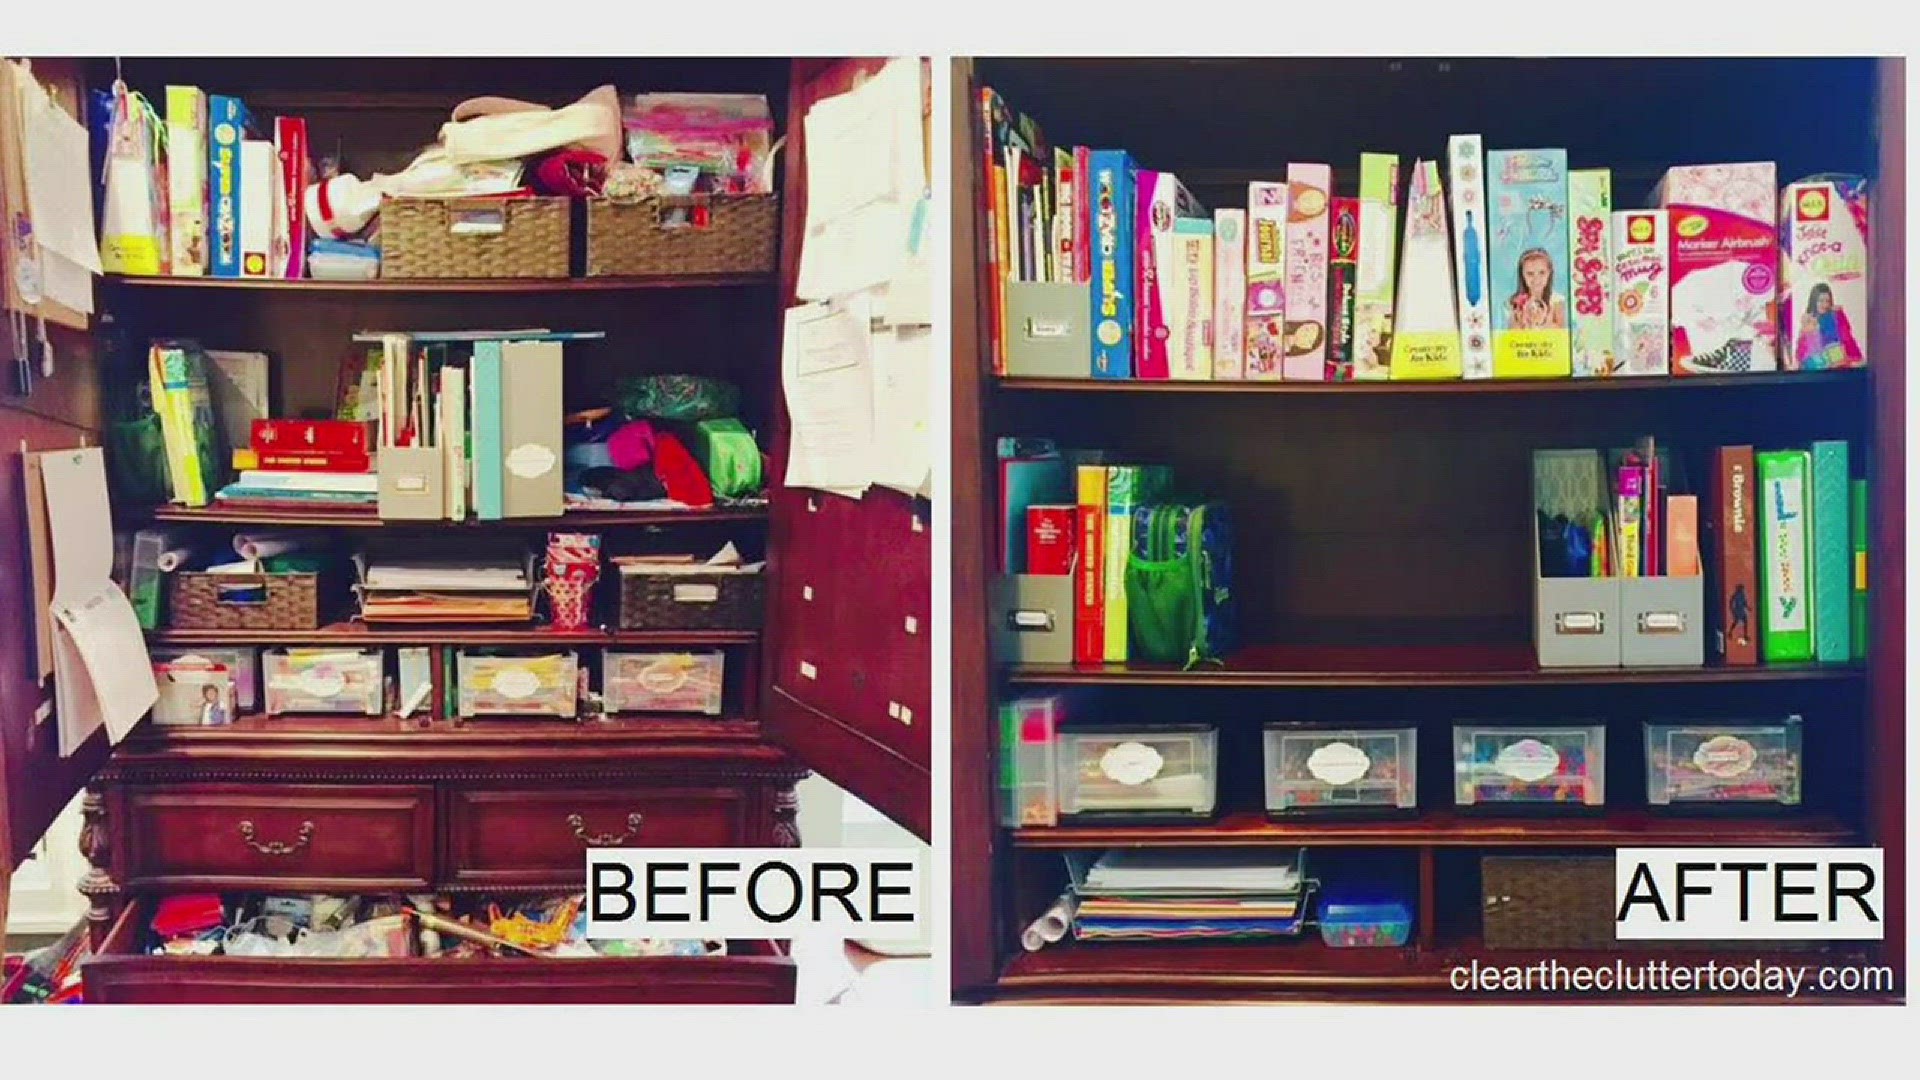 Stasia Cymes gives us tips on how to decrease clutter in our homes.